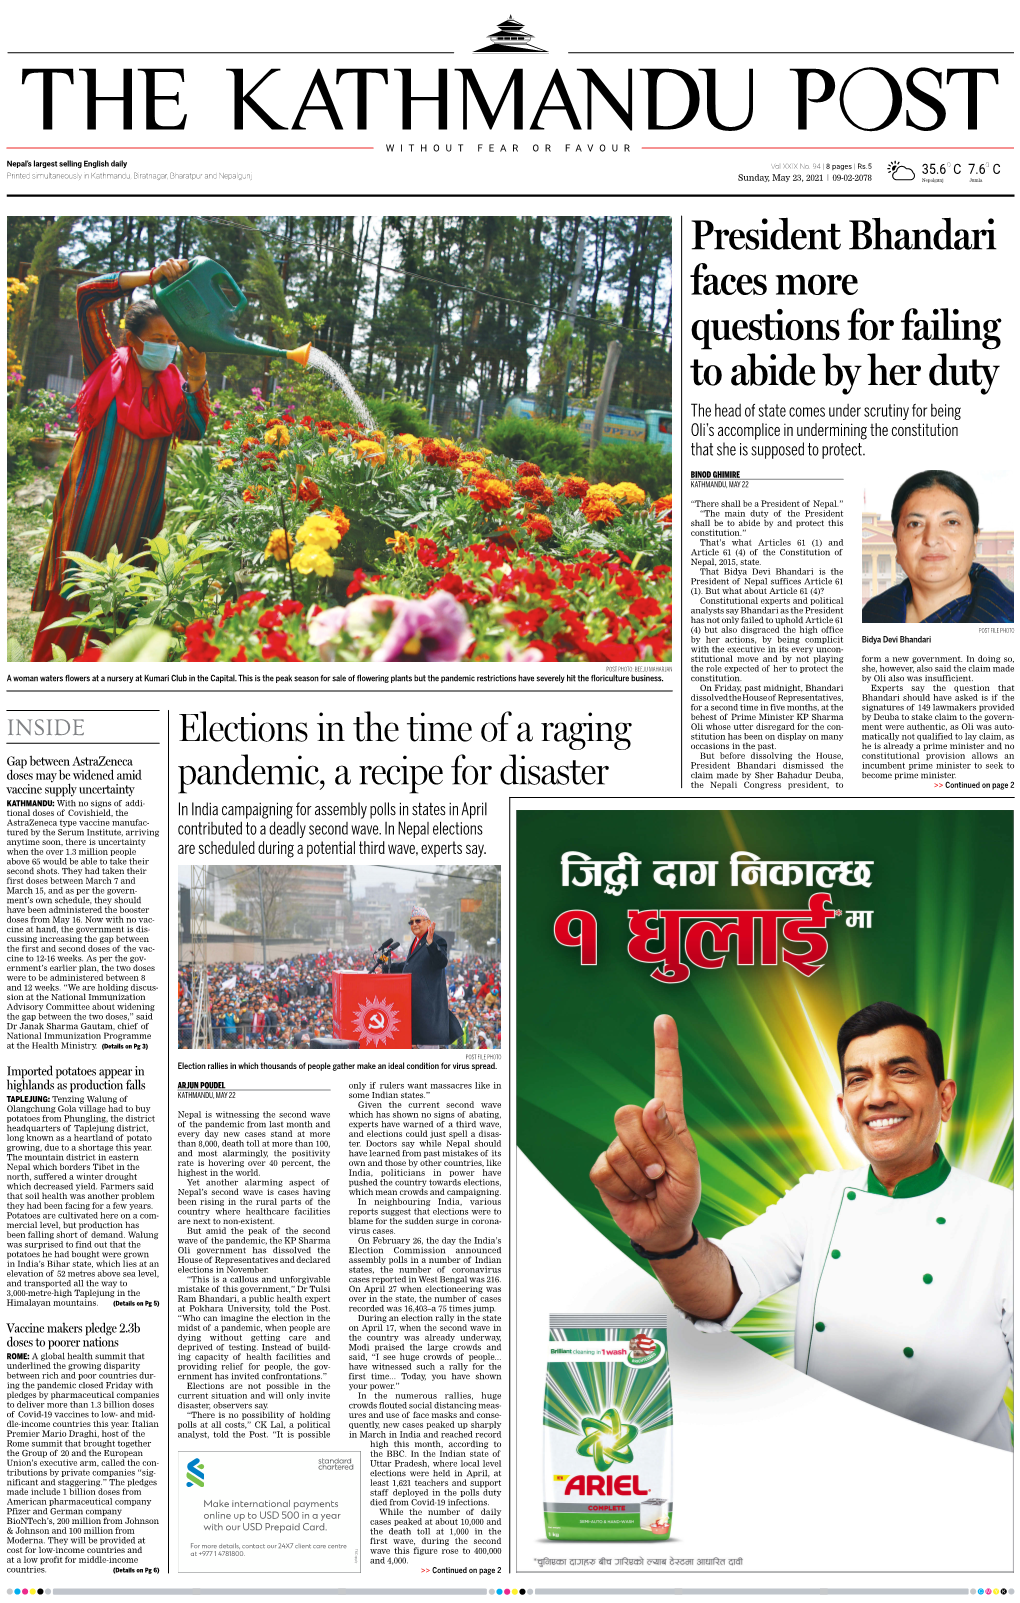 President Bhandari Faces More Questions for Failing to Abide by Her